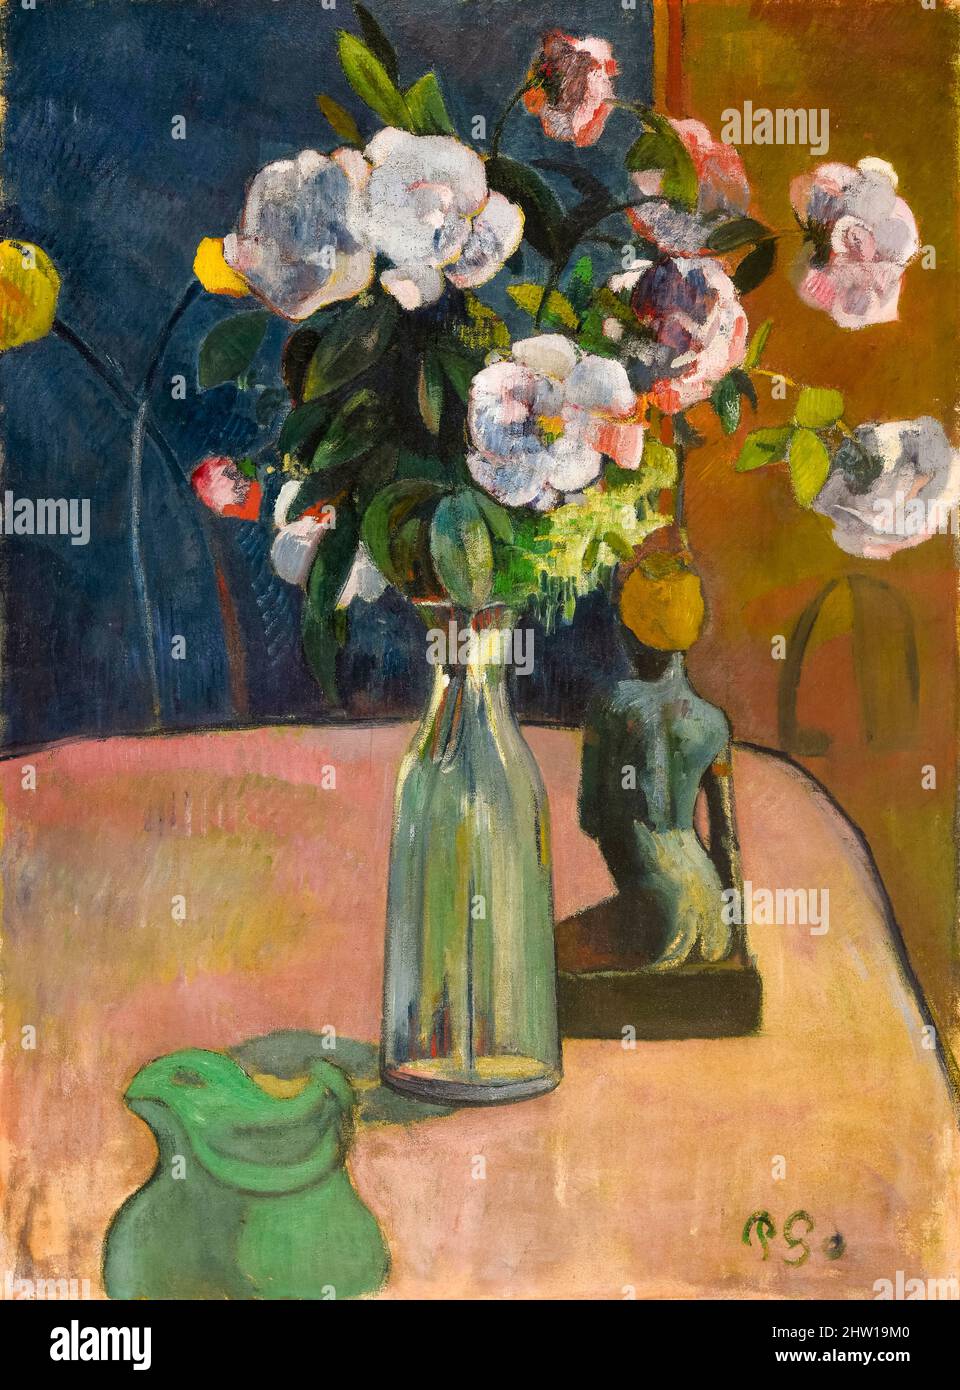 Paul Gauguin, Roses et statuette, still life painting in oil on canvas, 1889 Stock Photo